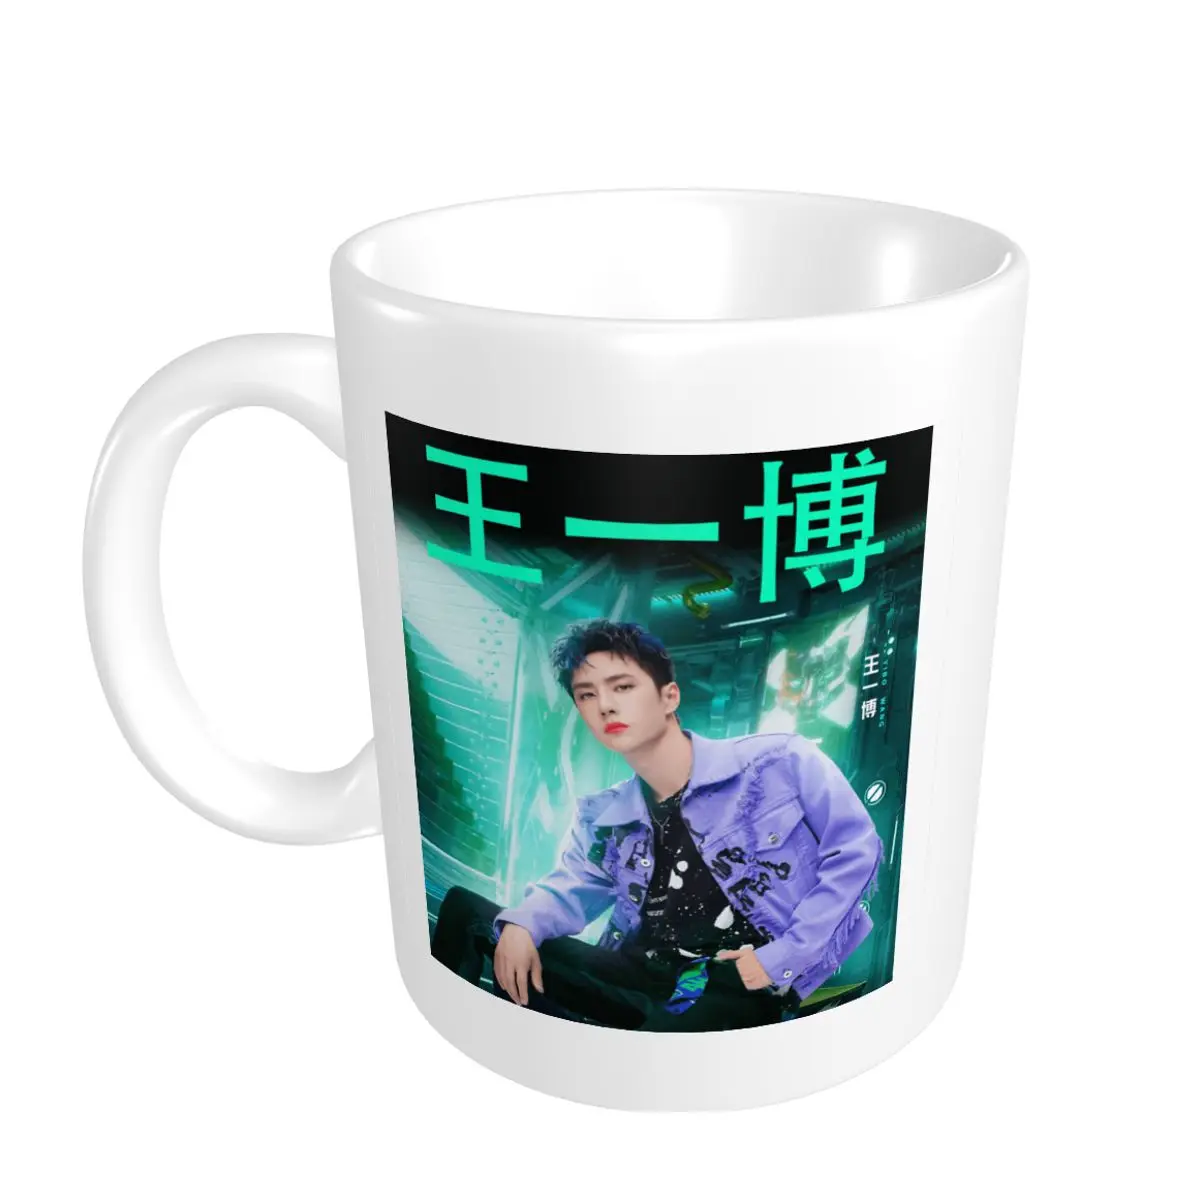 

Promo Casual Graphic The Untamed Wang Yibo SDC3 Essential Mugs Humor Graphic The Untamed CUPS Print coffee cups